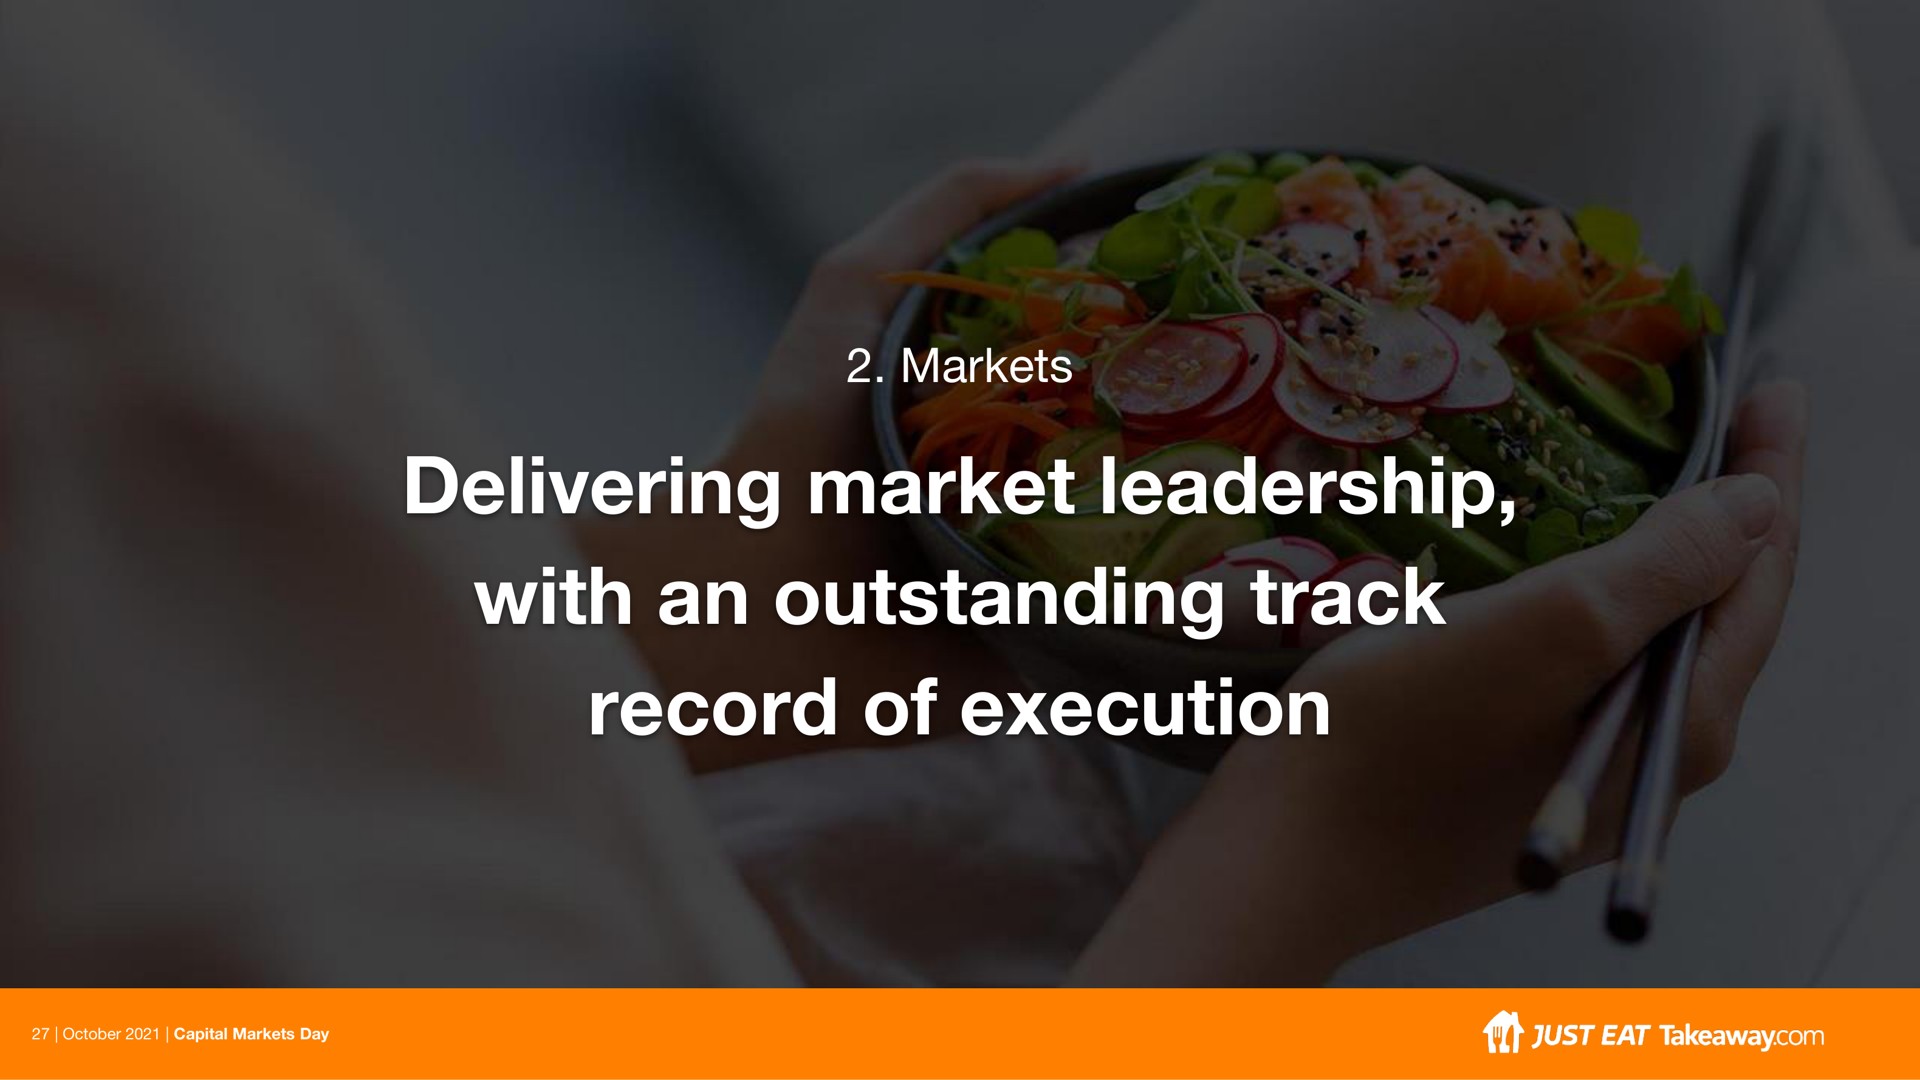 markets delivering market leadership with an outstanding track record of execution | Just Eat Takeaway.com